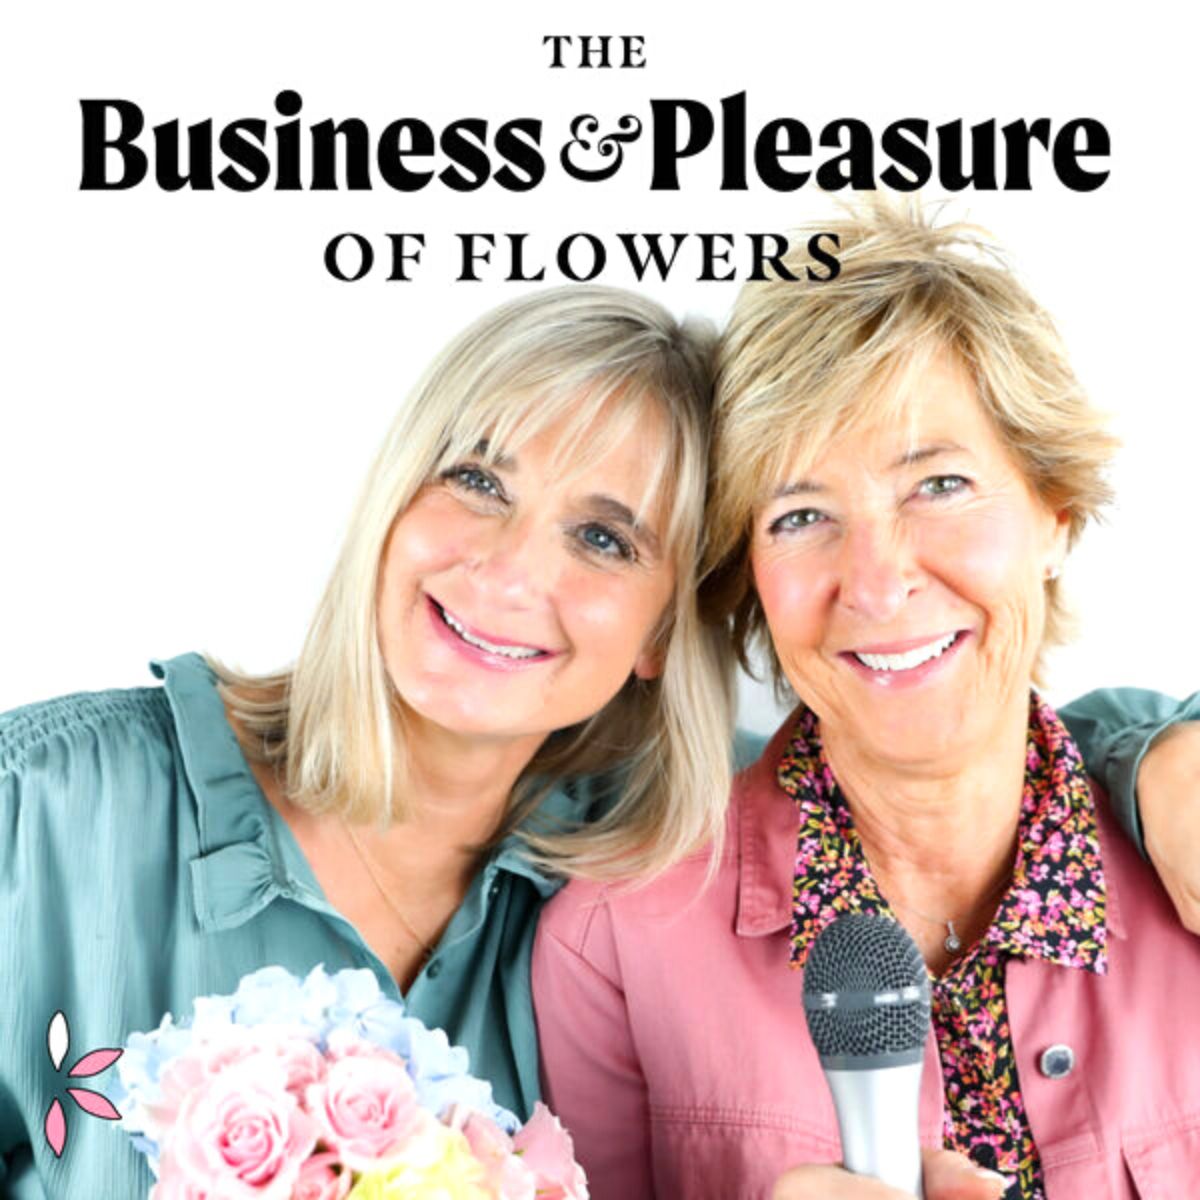 The business and pleasure of flowers podcast